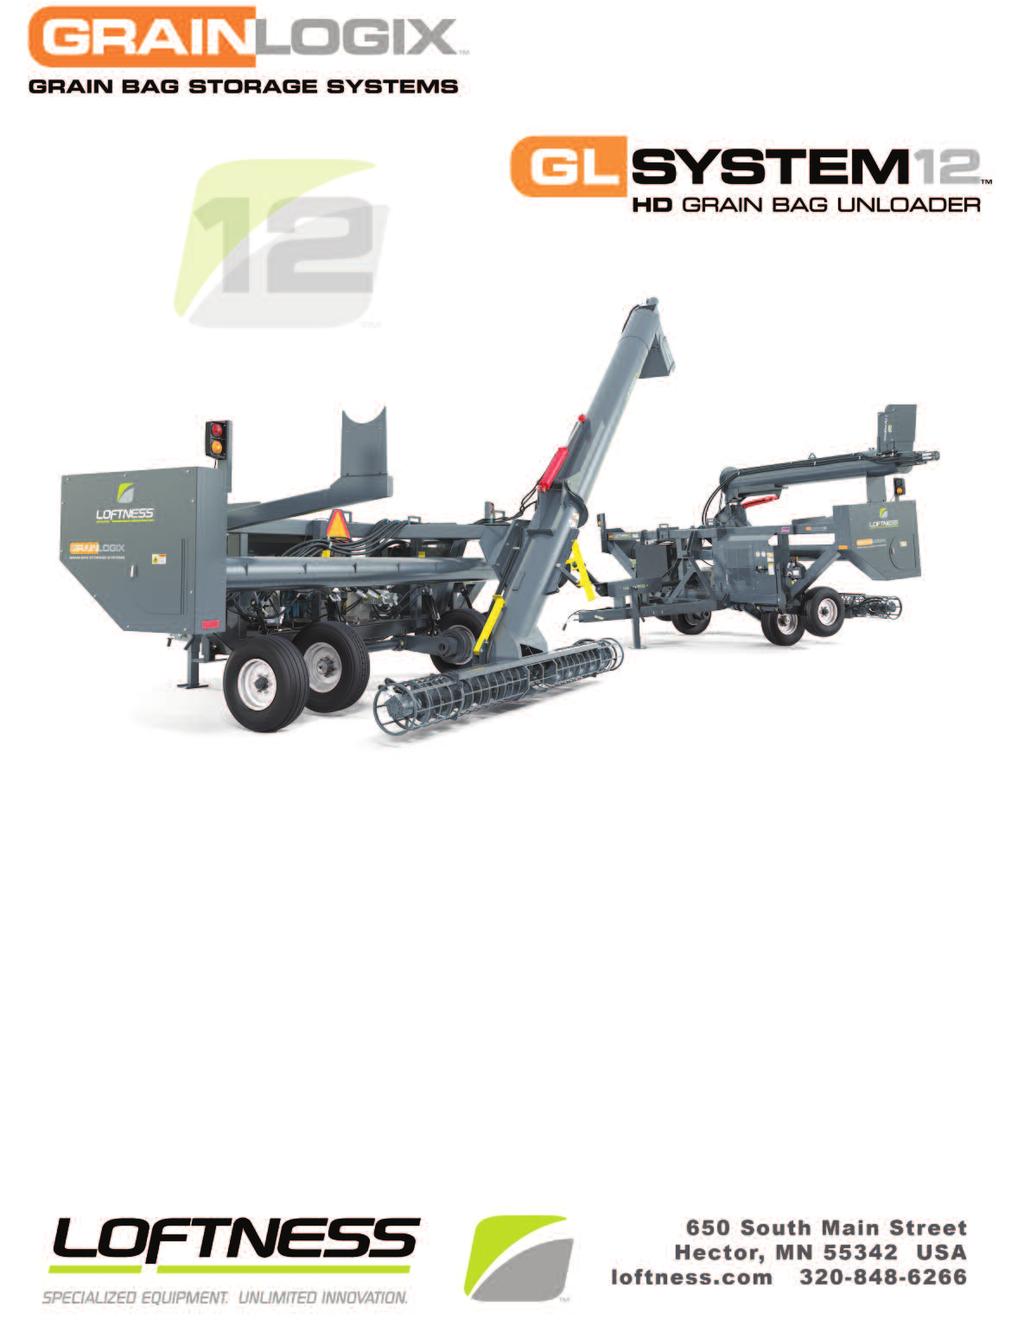 2015 L10027 - Printed 9.15.15 - Prices Effective 11.1.14 Subject to Change - USD - FOB Factory Retail prices Grain Bag Unloader Model GBU-12 Standard Features - Options are shown on the back page.